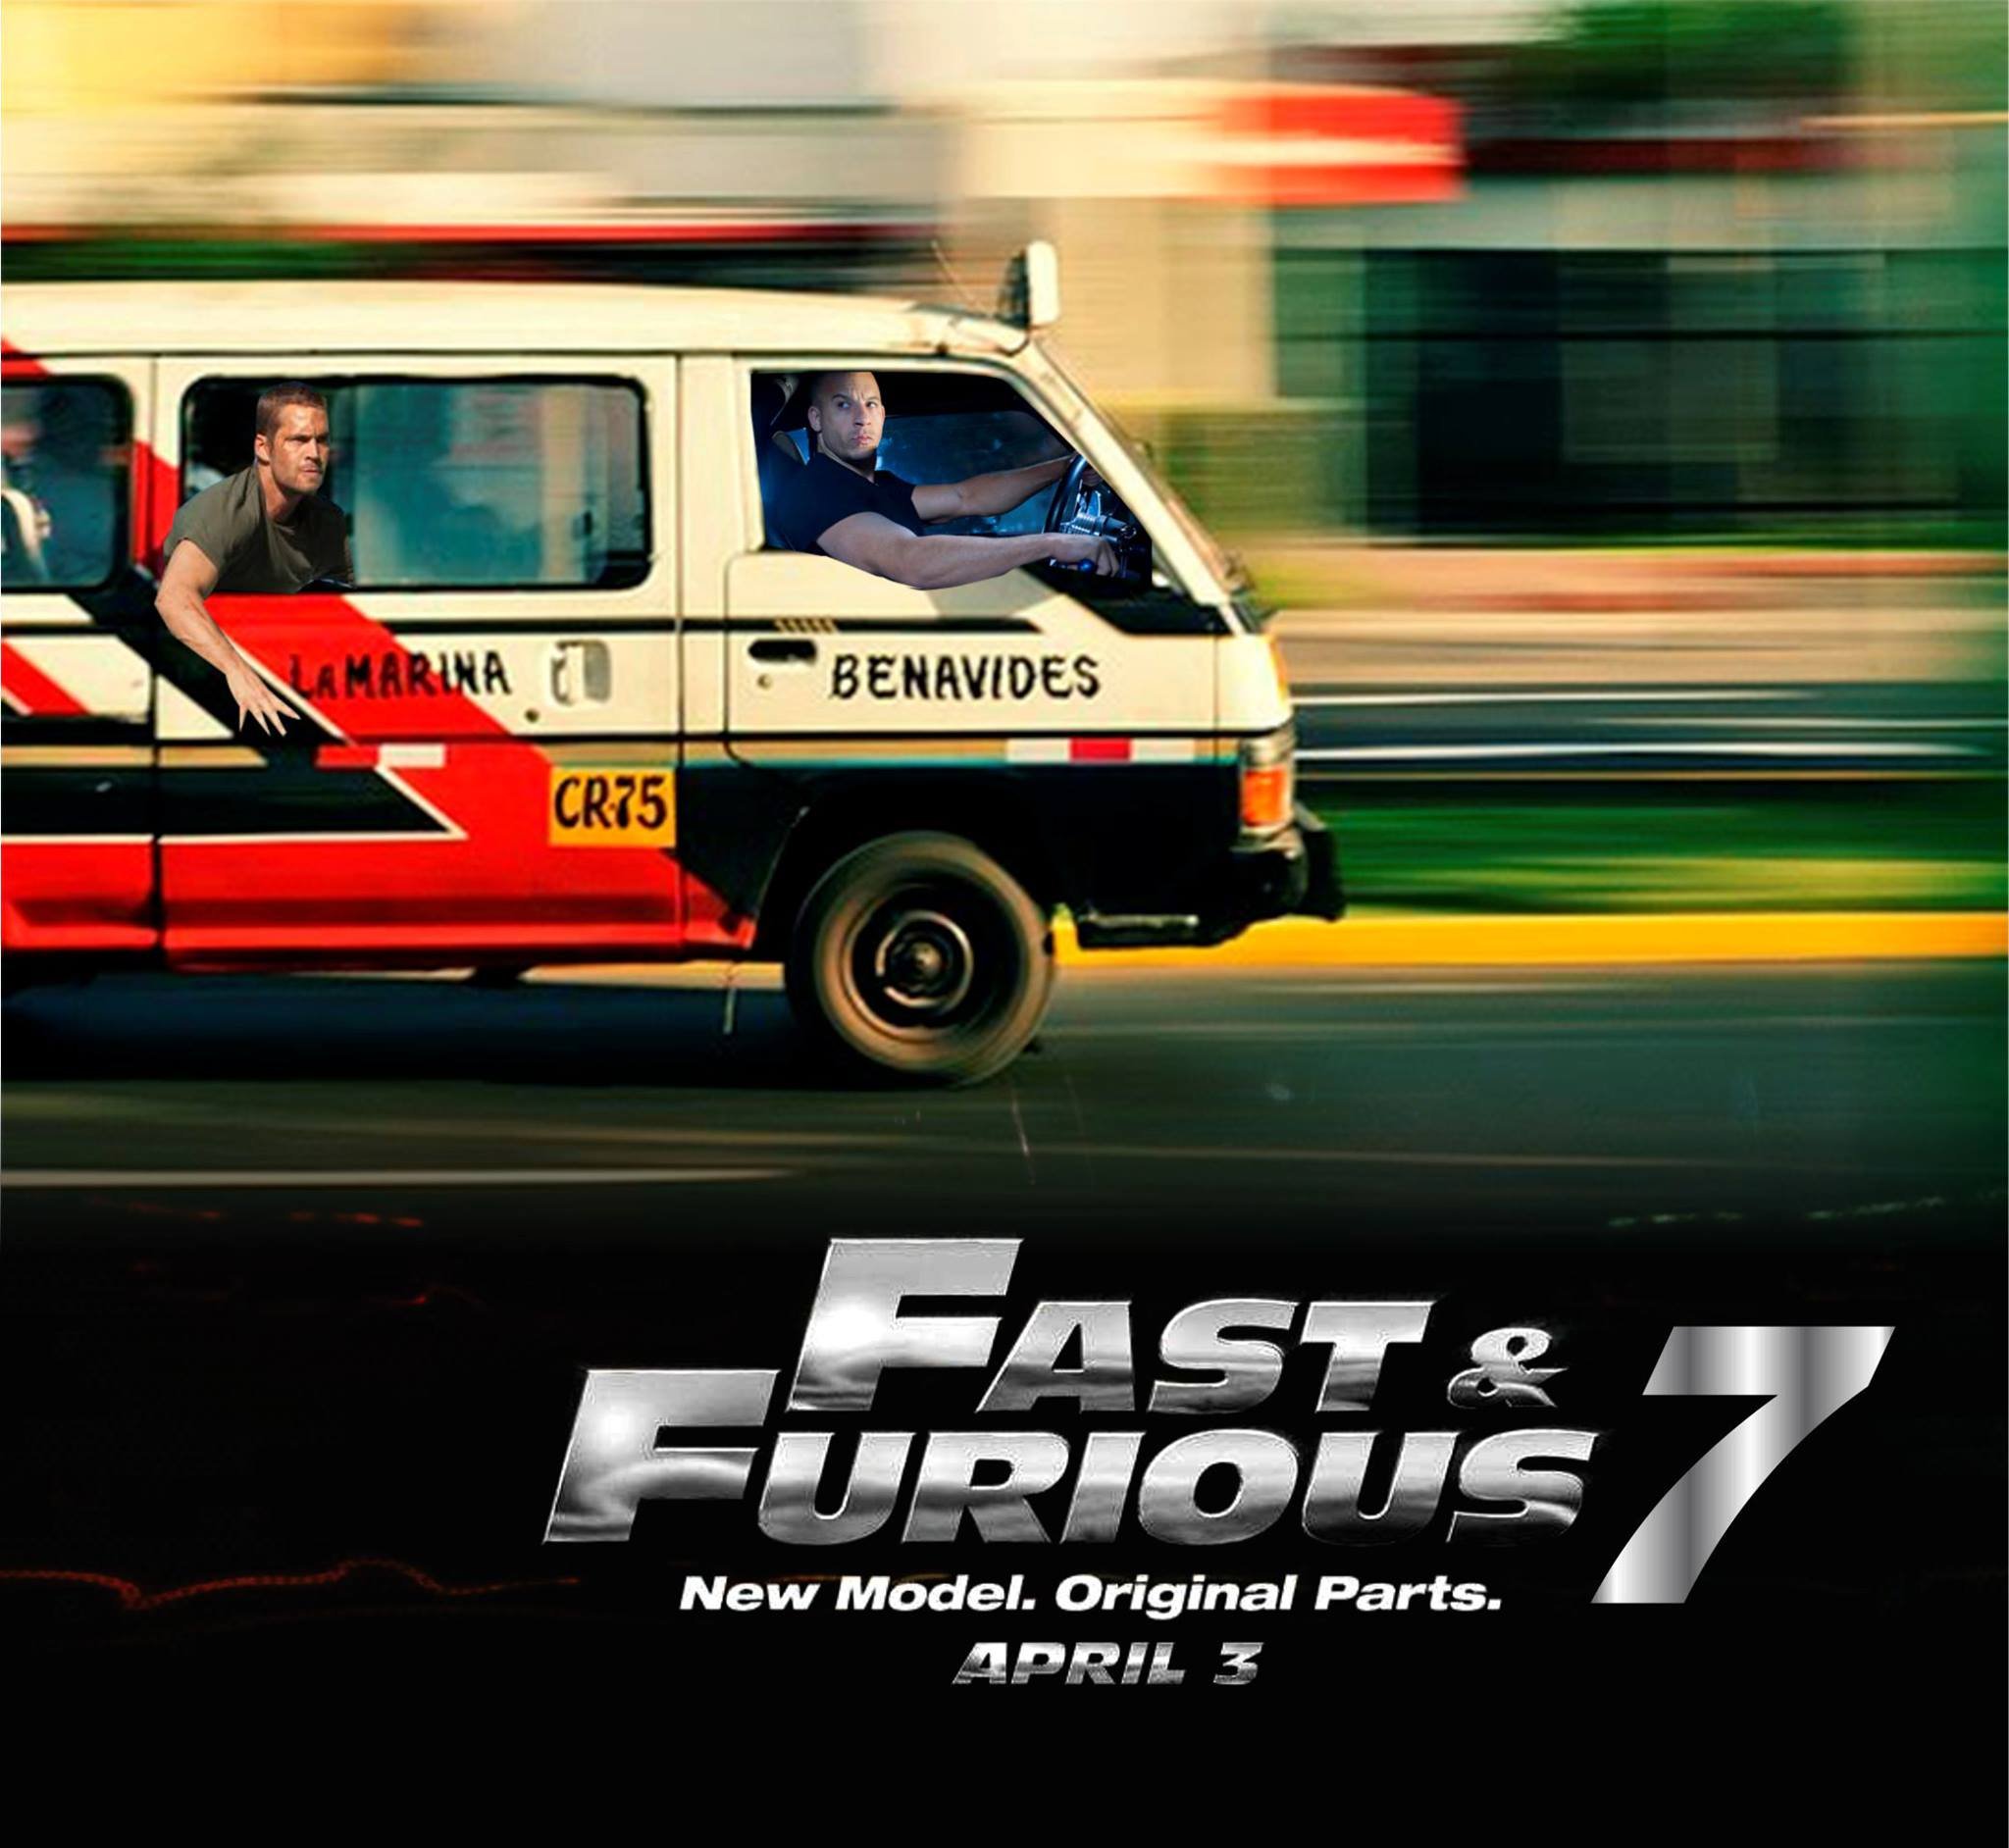 furious 7, Action, Race, Racing, Crime, Thriller, Fast, Furious Wallpapers  HD / Desktop and Mobile Backgrounds